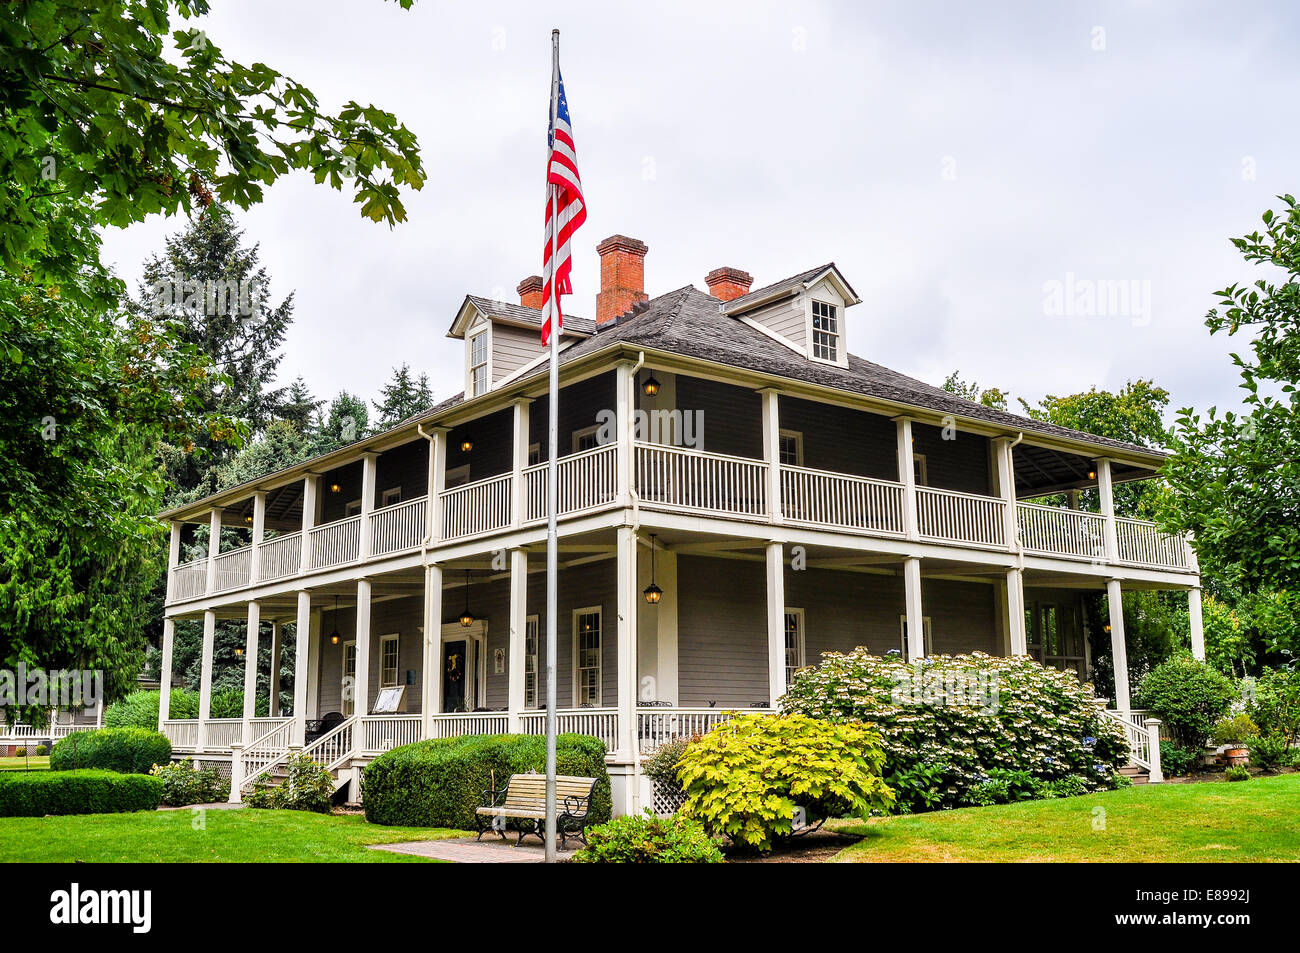 Ulysses S Grant House - Fort Vancouver, WA Stock Photo